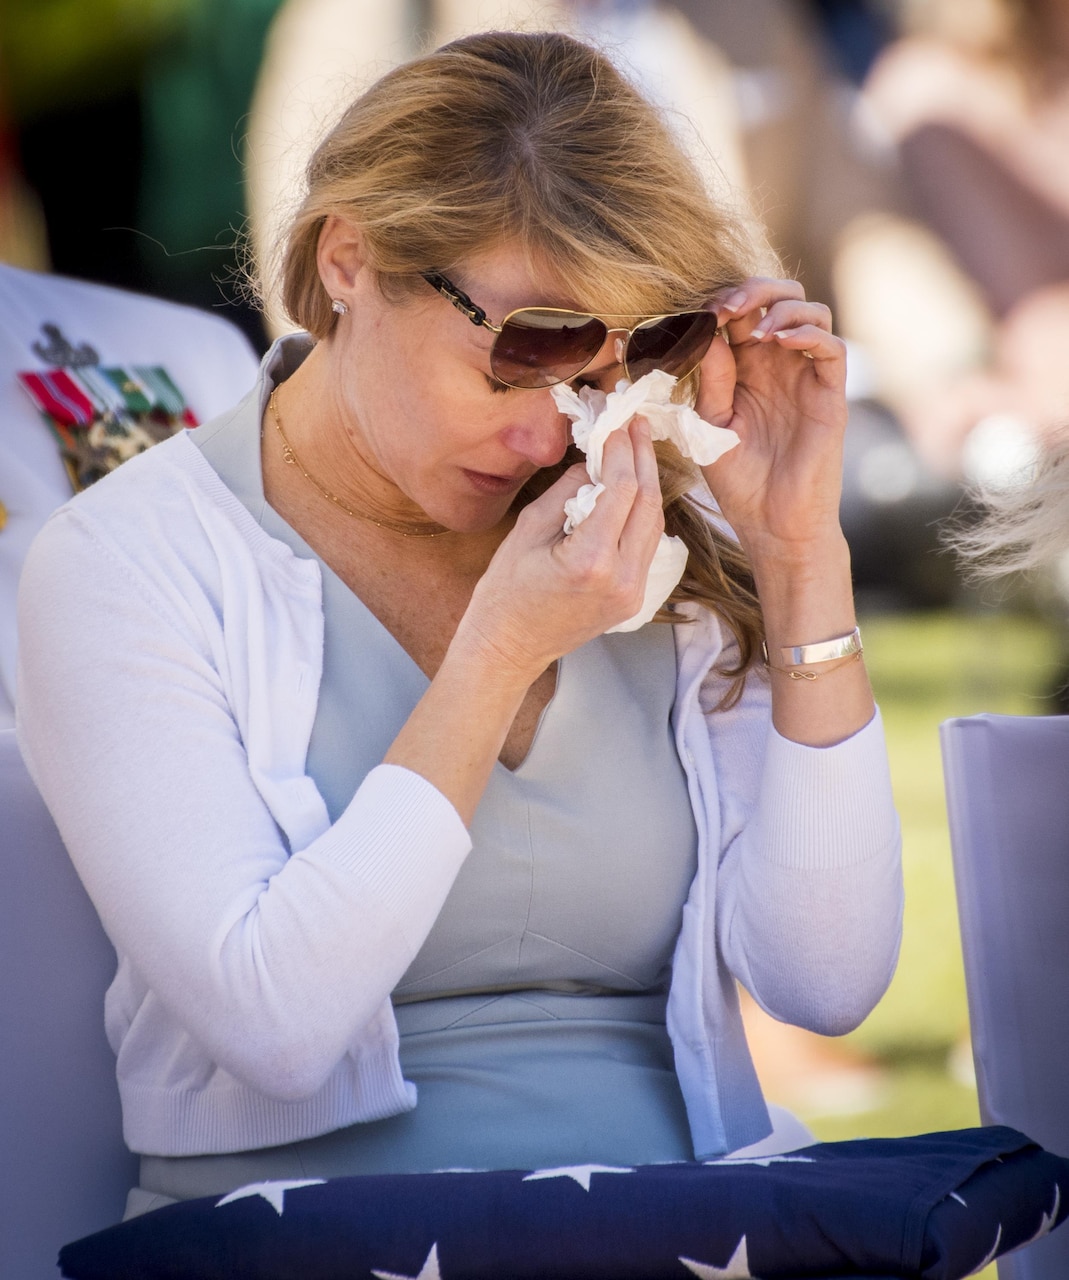 Kristen Dayton, widow of Senior Chief Petty Officer Scott Dayton, wipes away a tear after receiving a folded flag during the 48th Annual Explosive Ordnance Disposal Memorial Service, May 6. Dayton and other names of recent fallen and past EOD technicians are added to the memorial wall and flags presented to their families during a ceremony each year at the Kauffman EOD Training Complex at Eglin Air Force Base, Fla. The Army and Navy added six new names this year. The all-service total now stands at 326. (U.S. Air Force photo/ Samuel King Jr.)